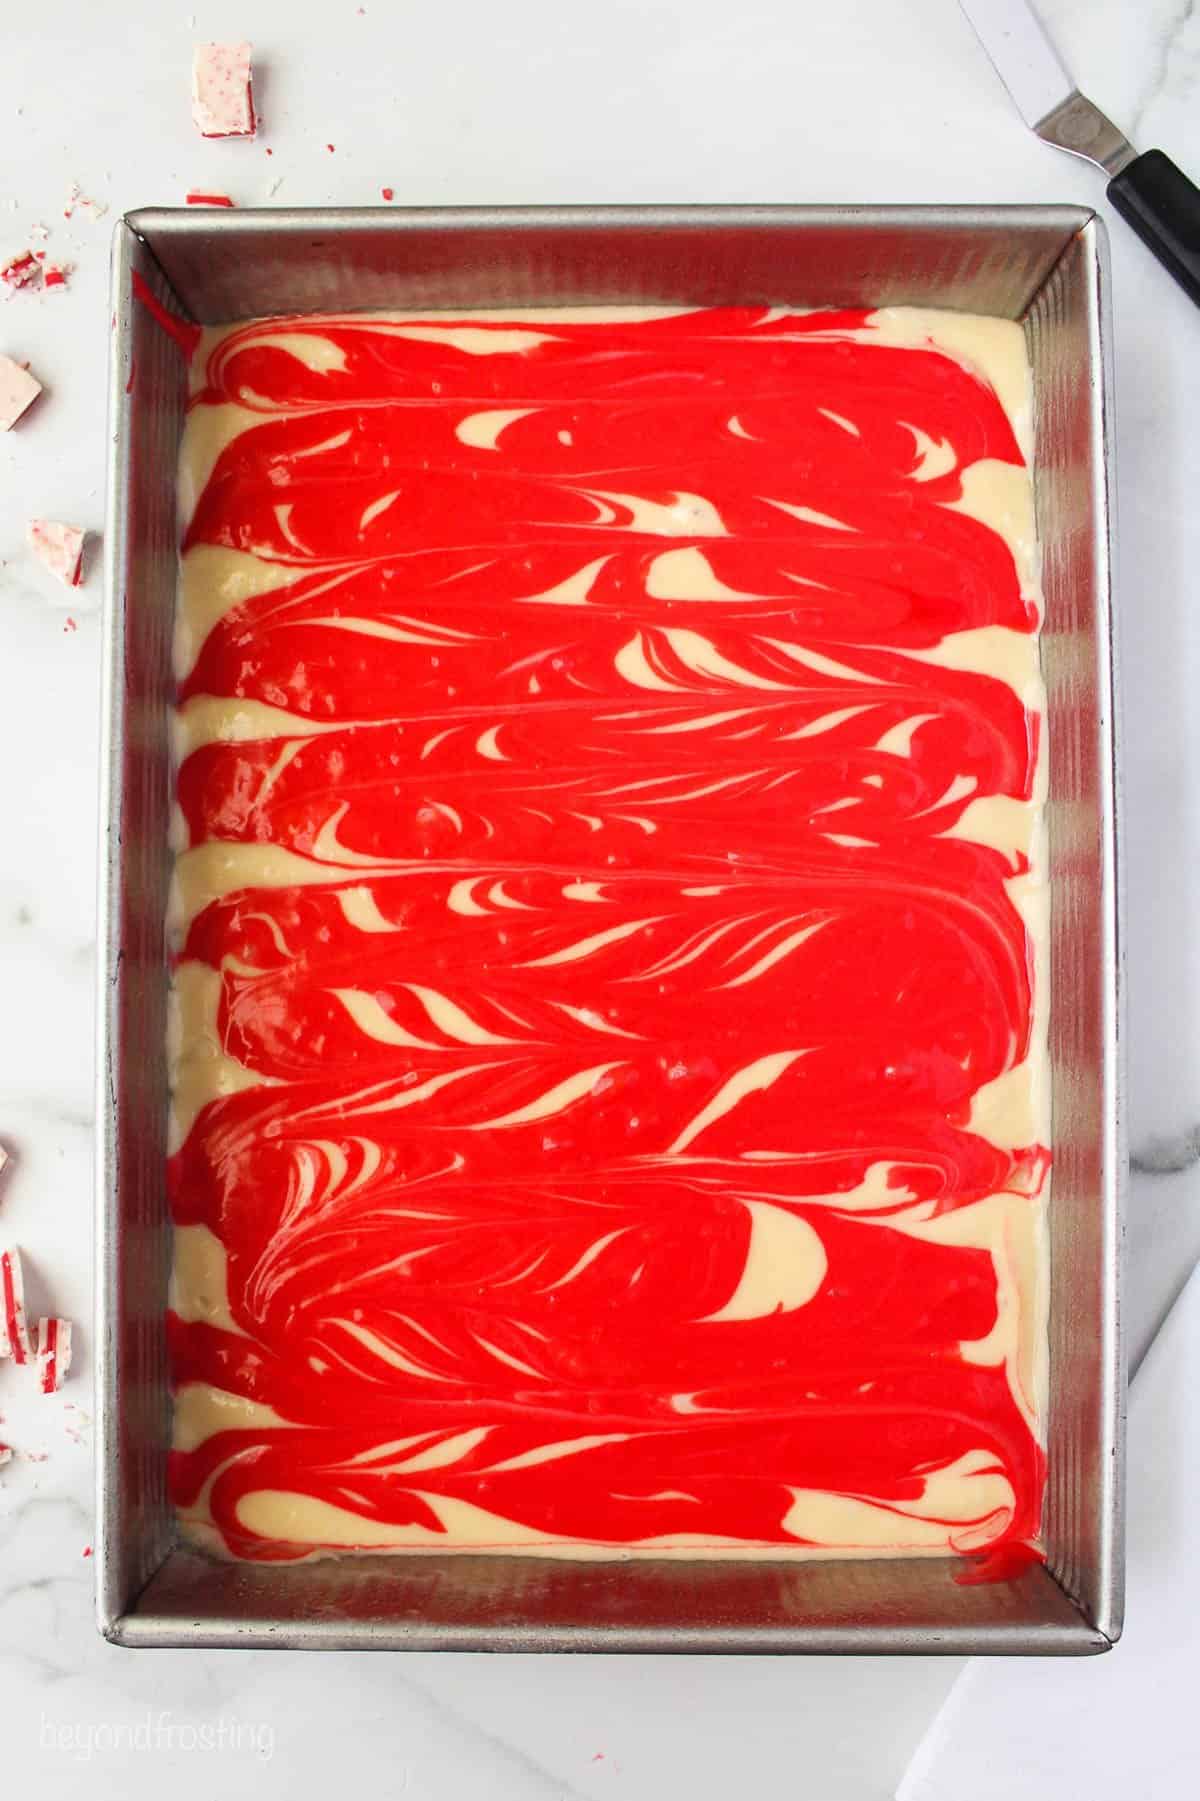 red and white cake batters swirled together in a cake pan